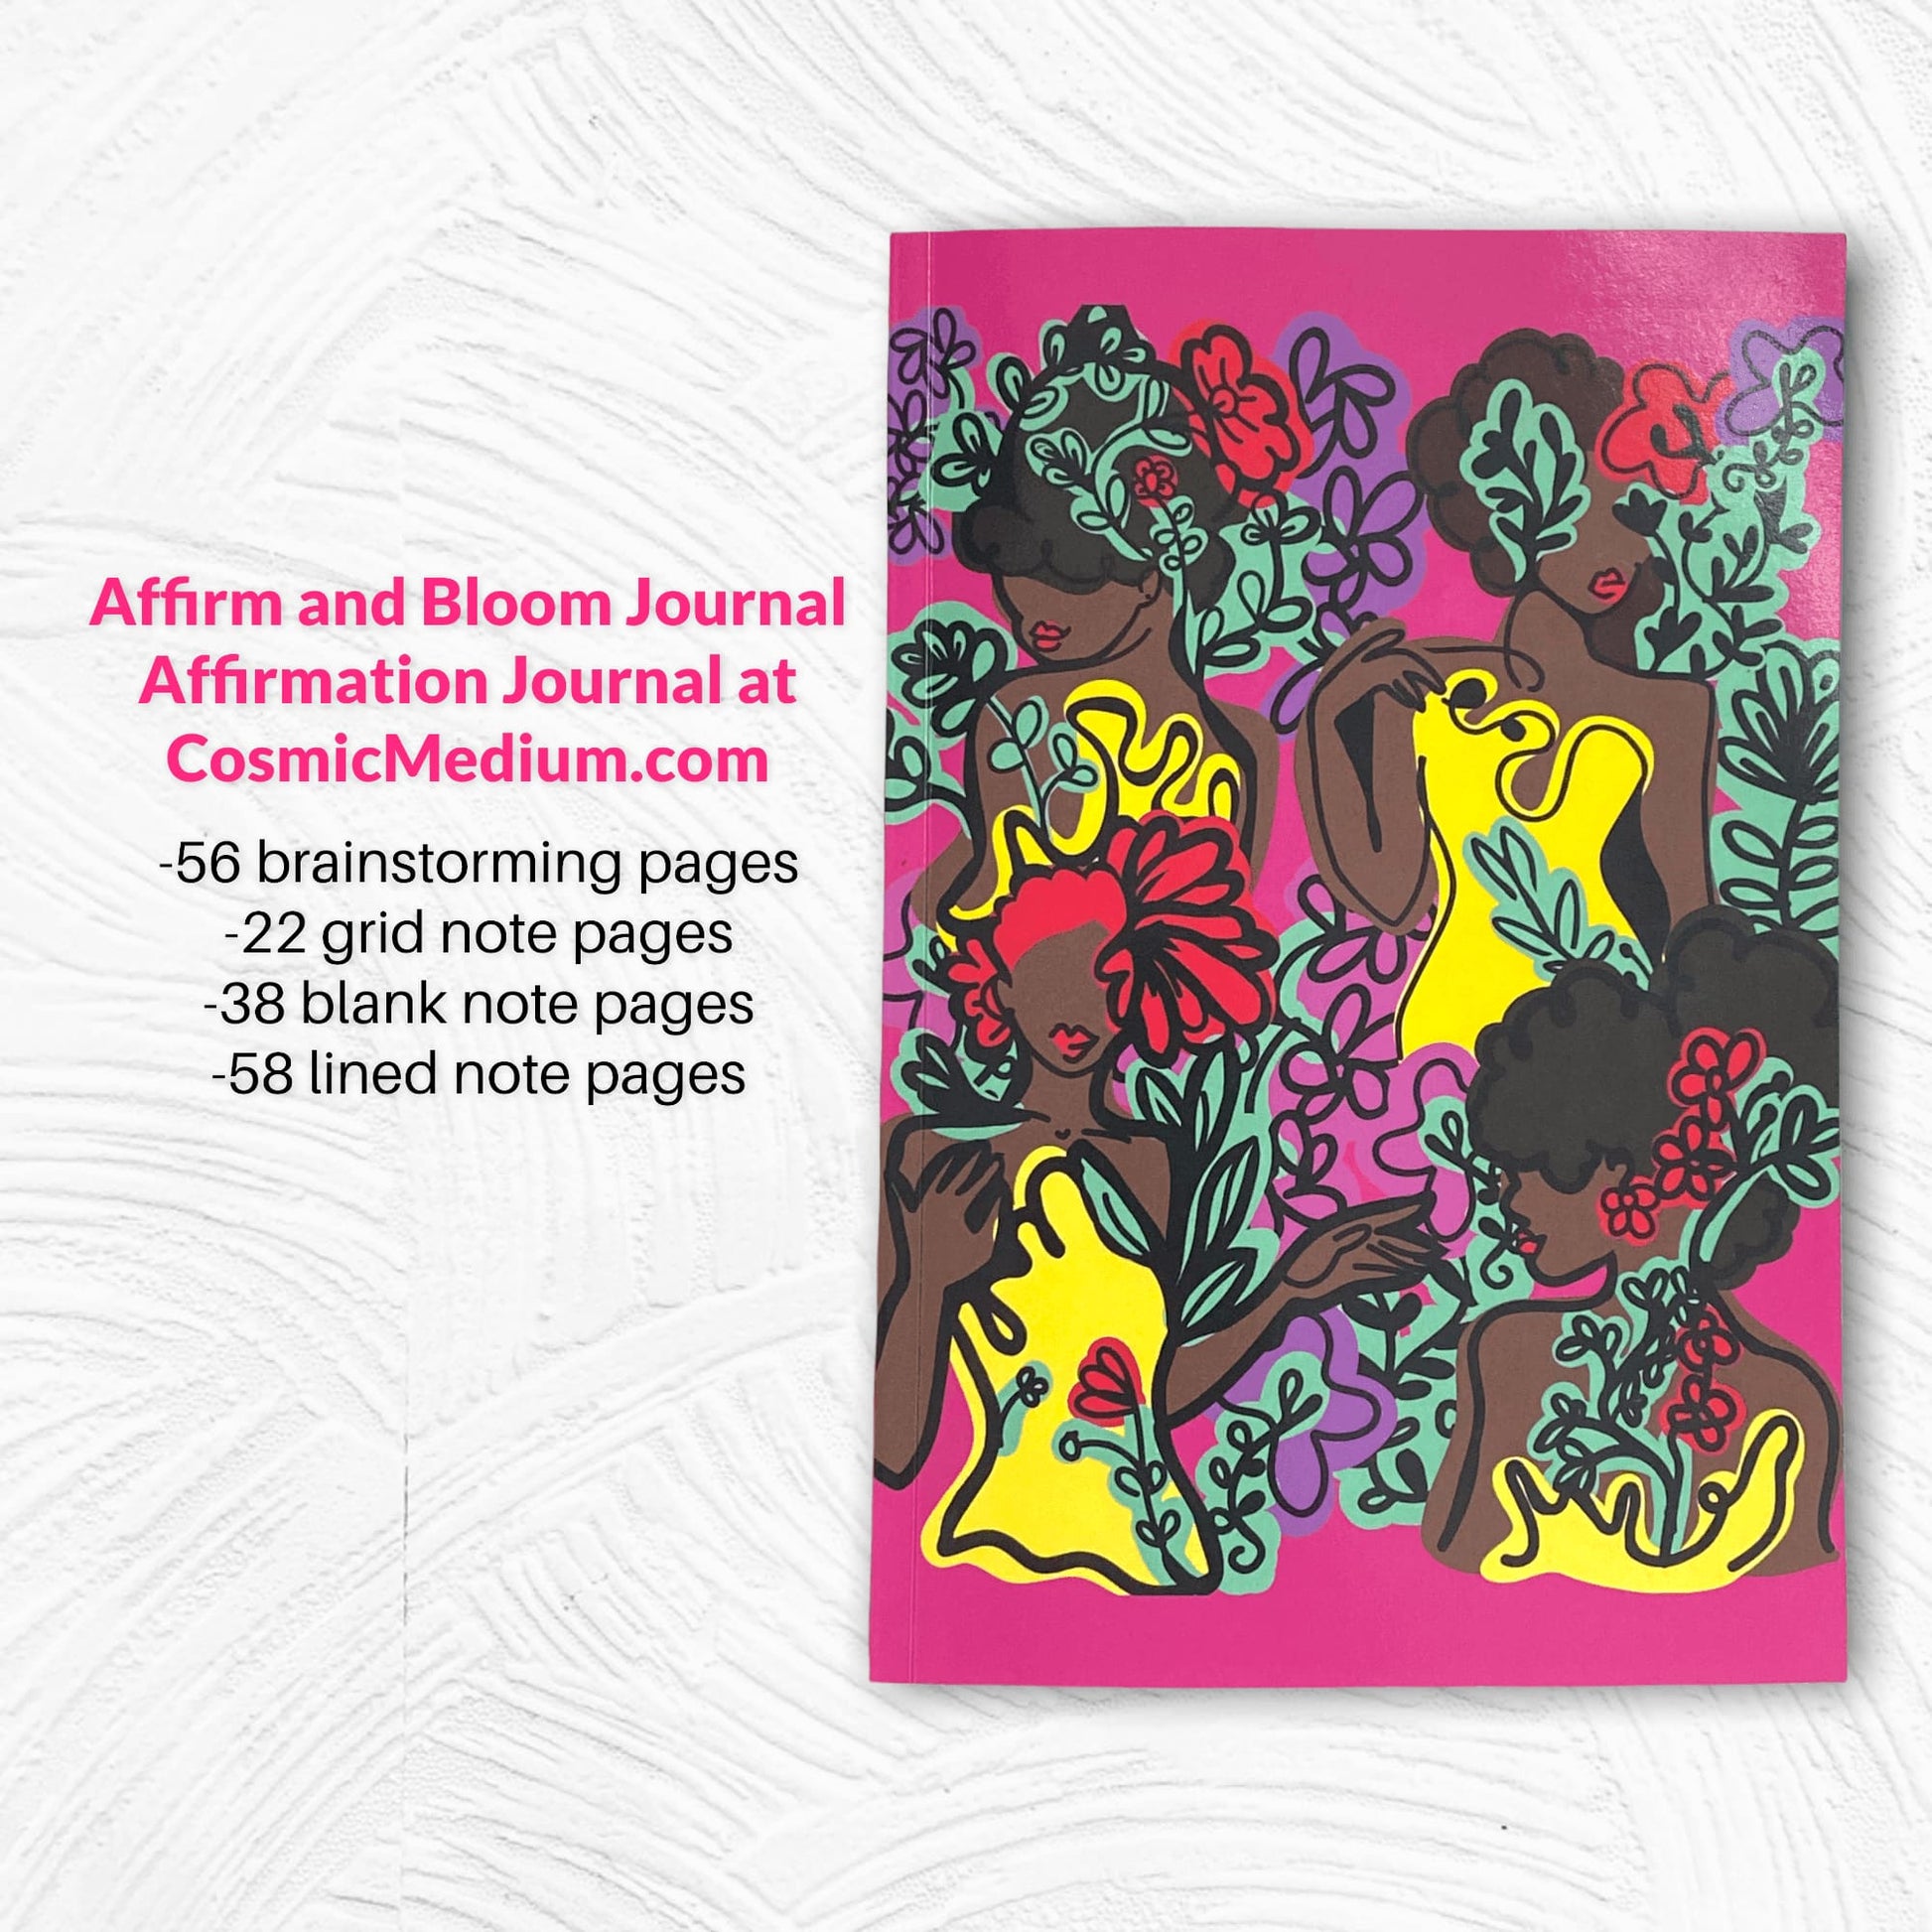 Affirm and Bloom Affirmation Journal - Turn Your Positive Affirmations into Reality - CosmicMedium